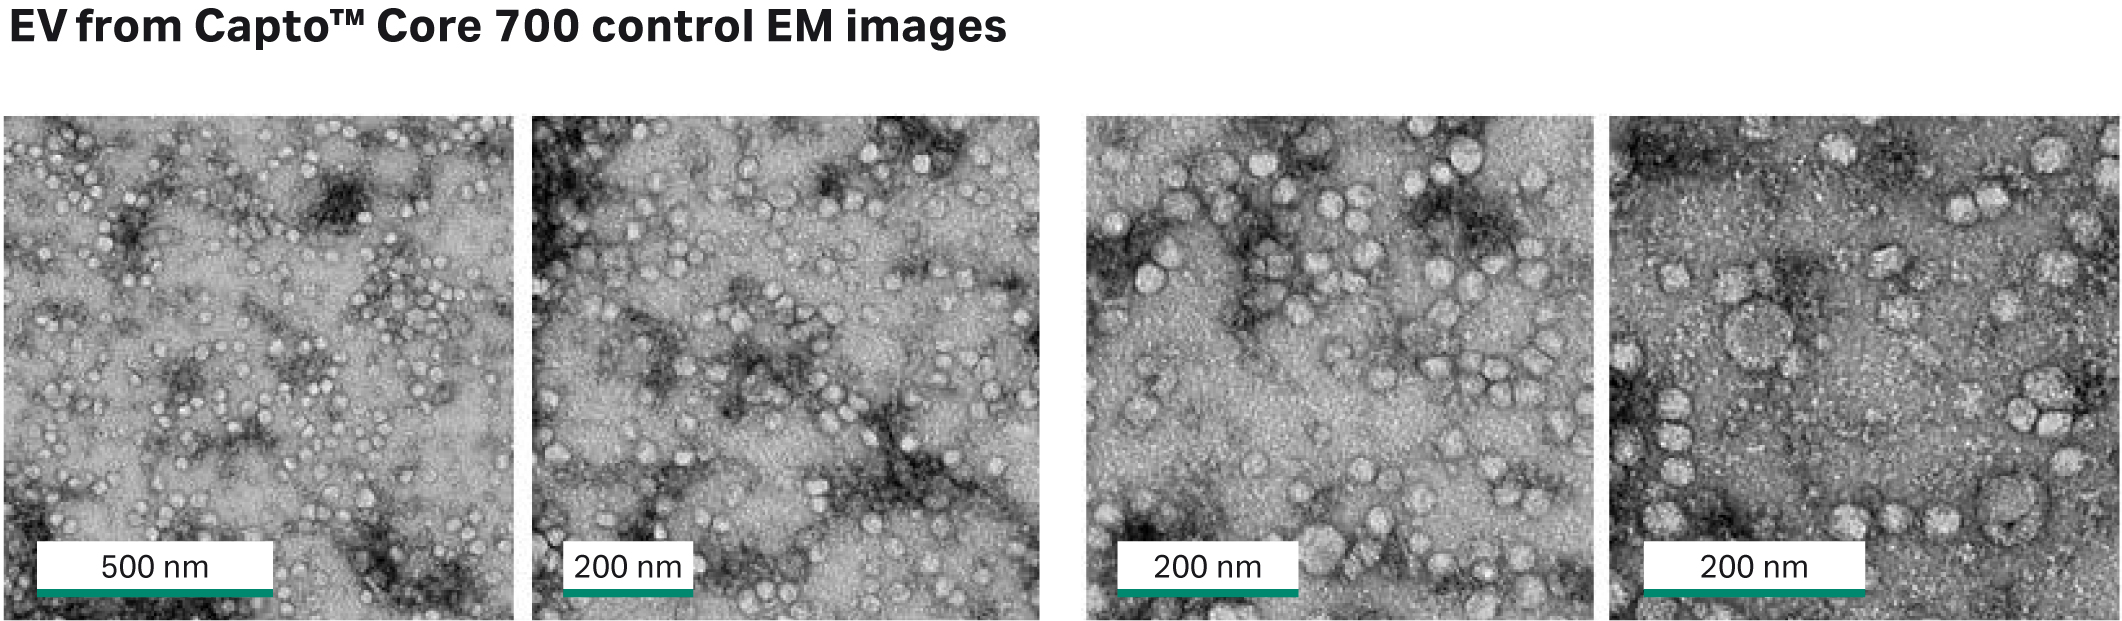 Electron microscopy images from flowthrough fraction after purification with Capto™ Core 700 beads.